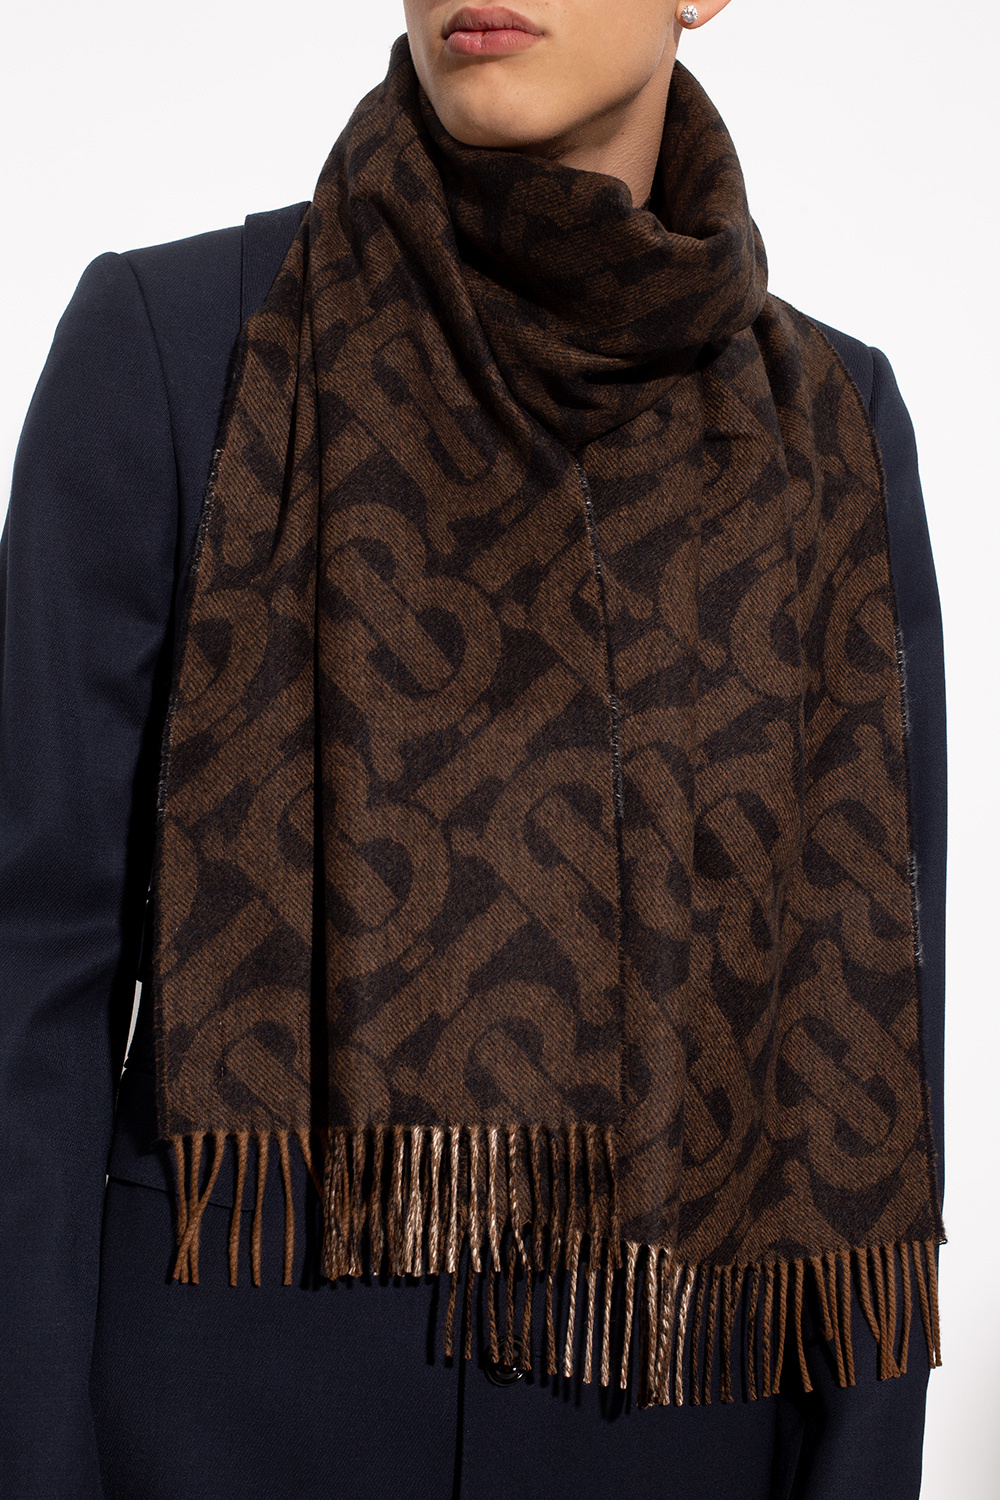 burberry Brown Reversible cashmere scarf